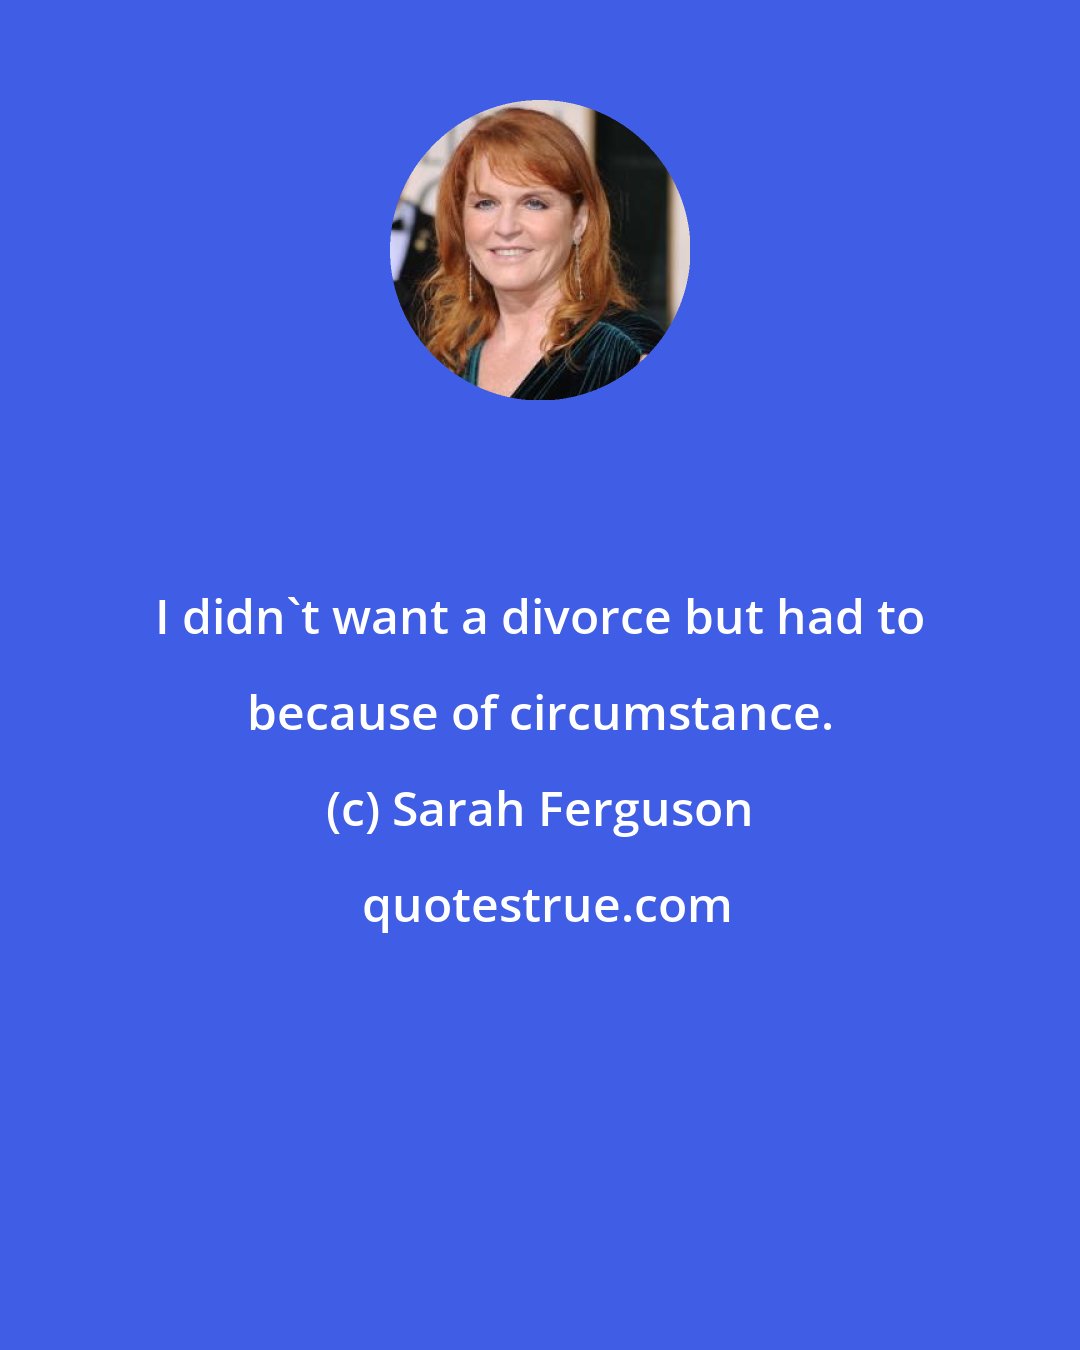 Sarah Ferguson: I didn't want a divorce but had to because of circumstance.